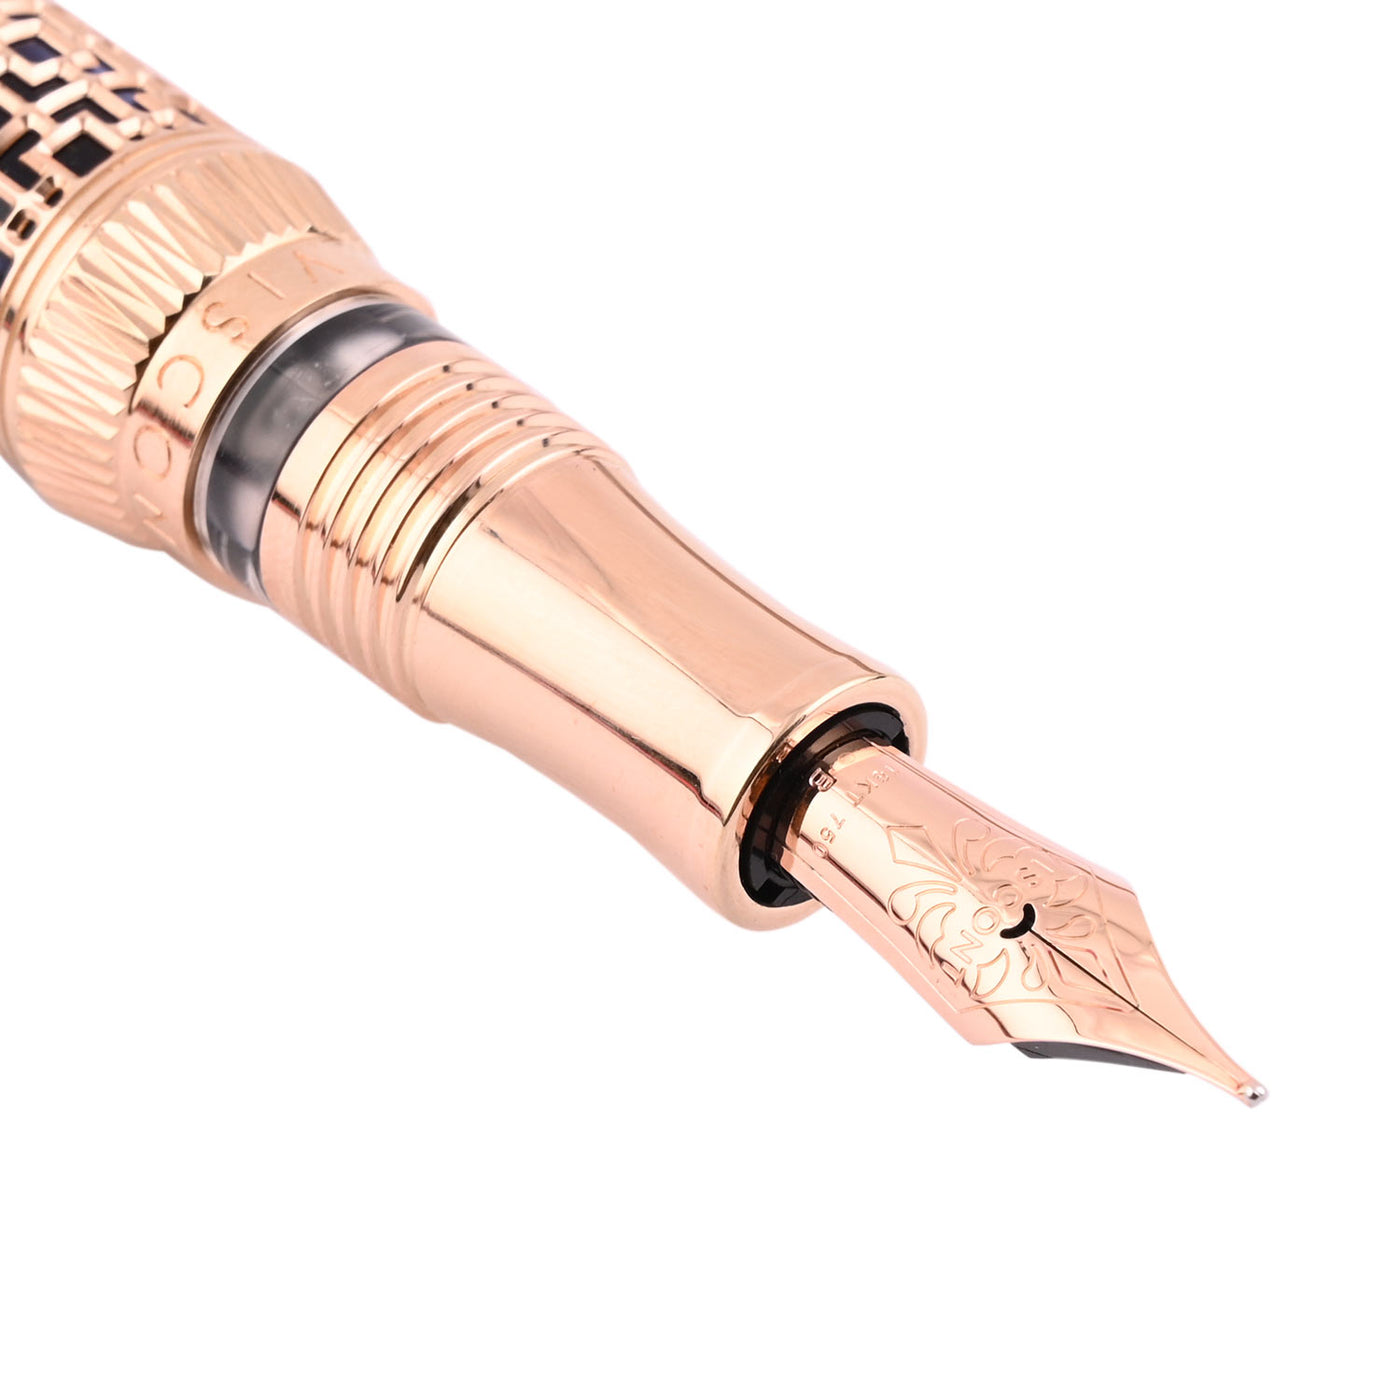 Visconti Looking East Fountain Pen - Rosegold (Limited Edition) 3